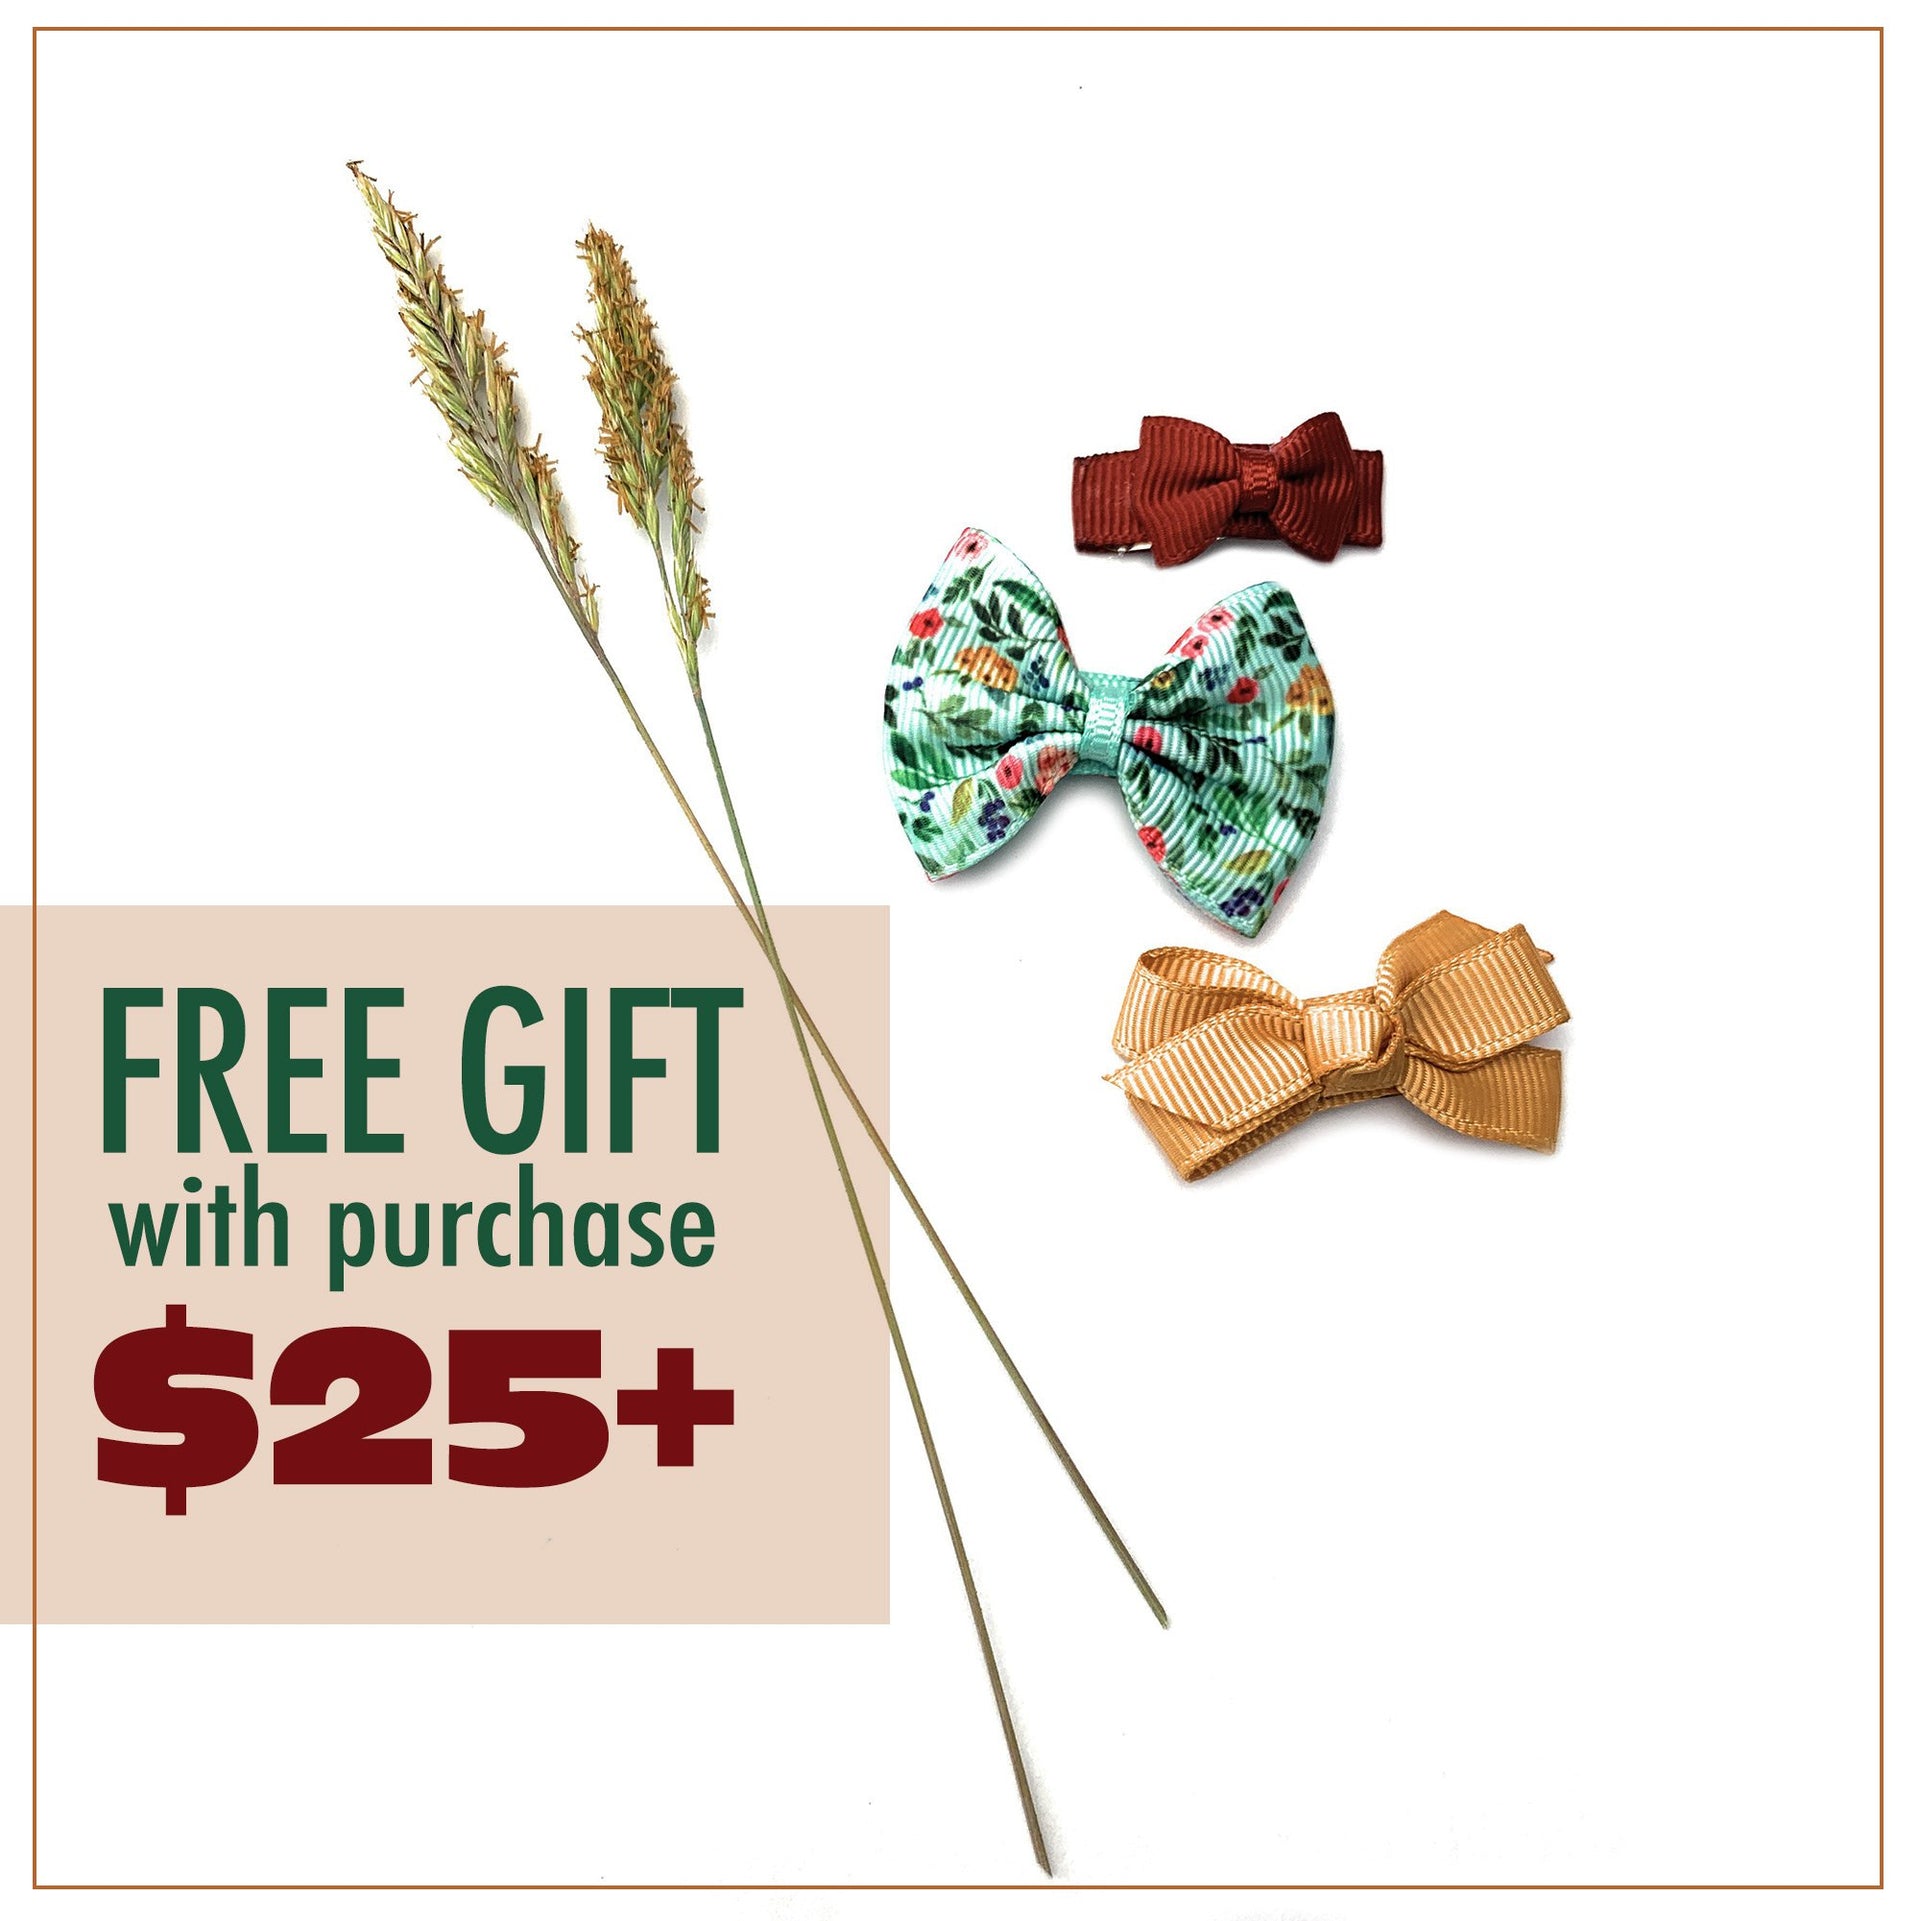 Spend Only $25 - Get FREE* Summer Bows!